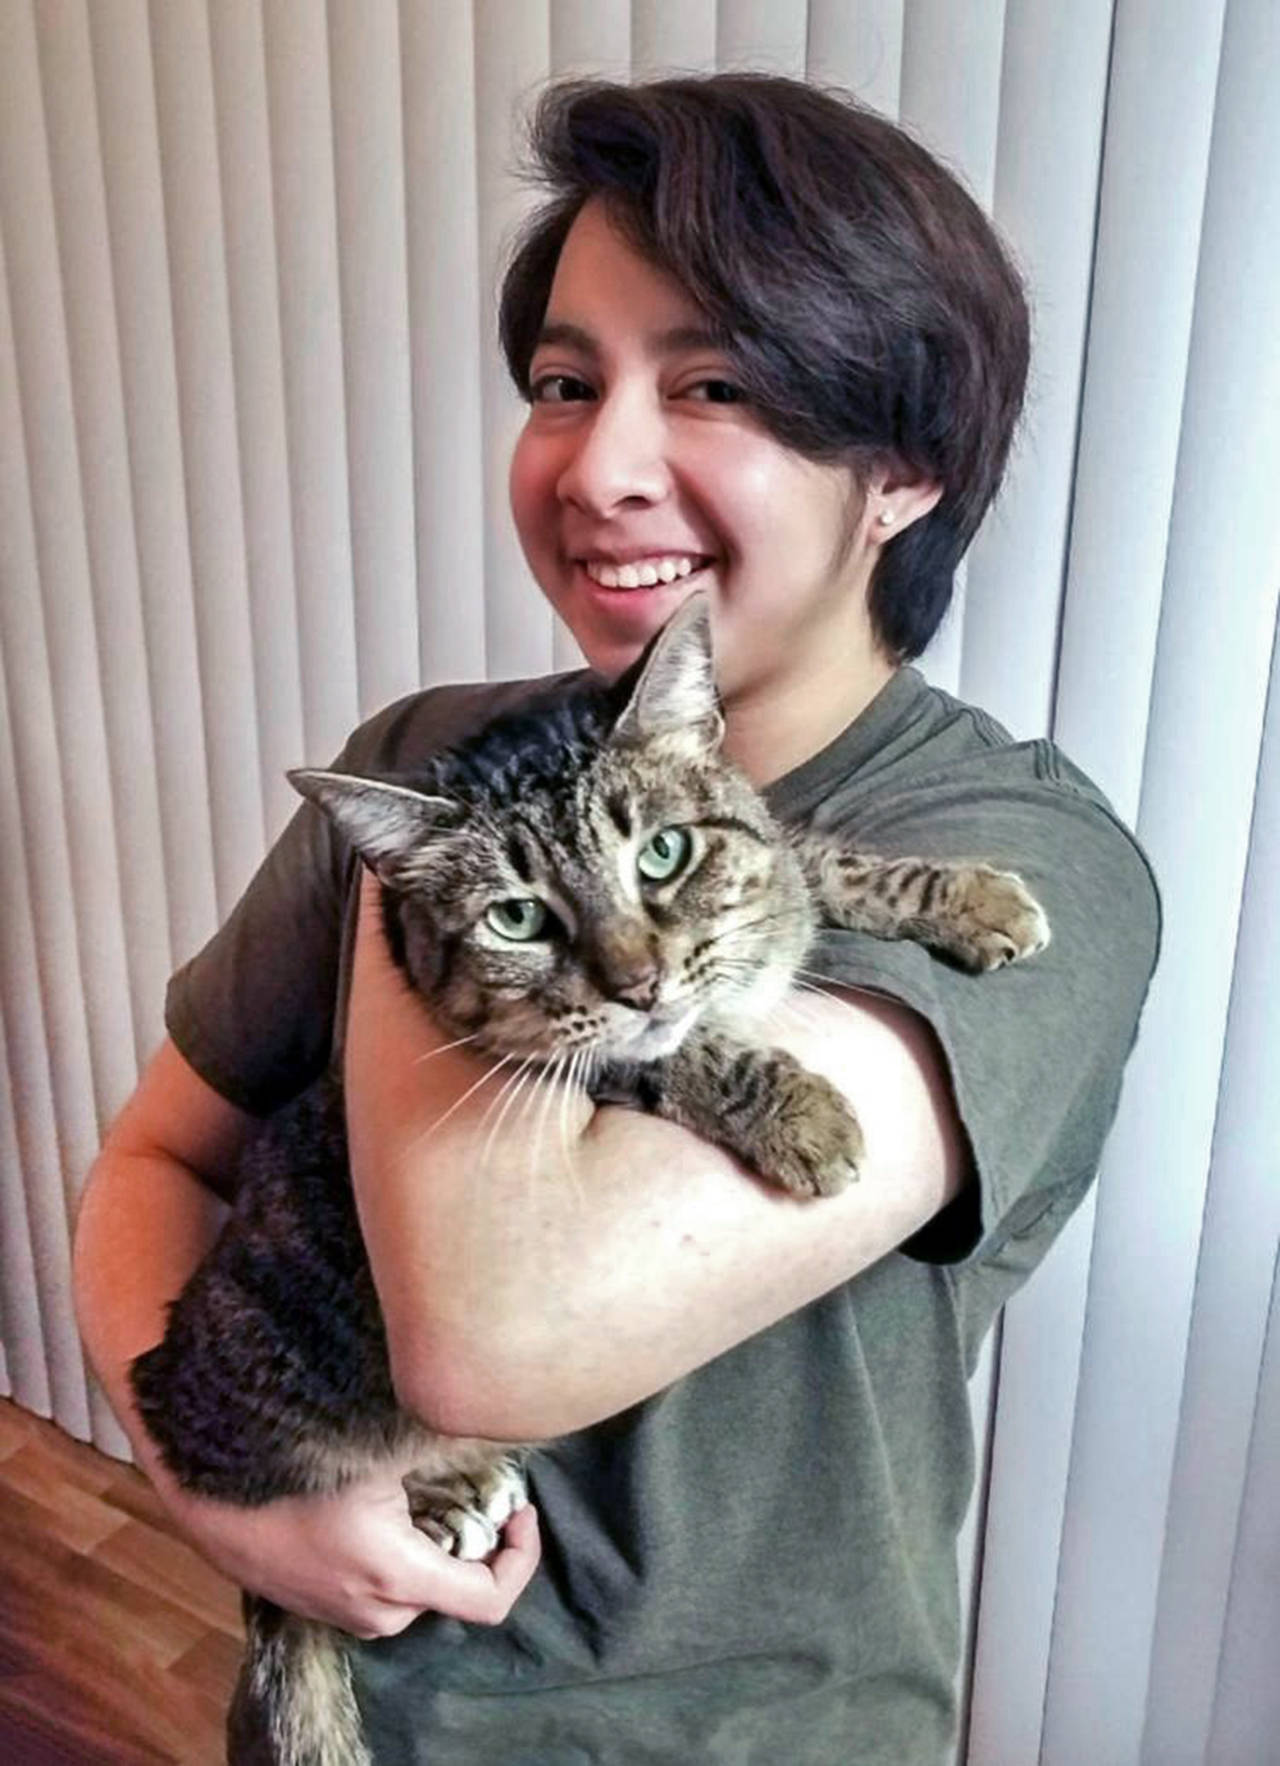 Courtesy photo                                Antonio Martinez of Beaverton, Oregon, stopped at the Deadman Pass rest area to stretch his legs and Korra, his 4-year-old tabby, slipped out. Two months later, they were reunited thanks to the efforts of an Aberdeen family.